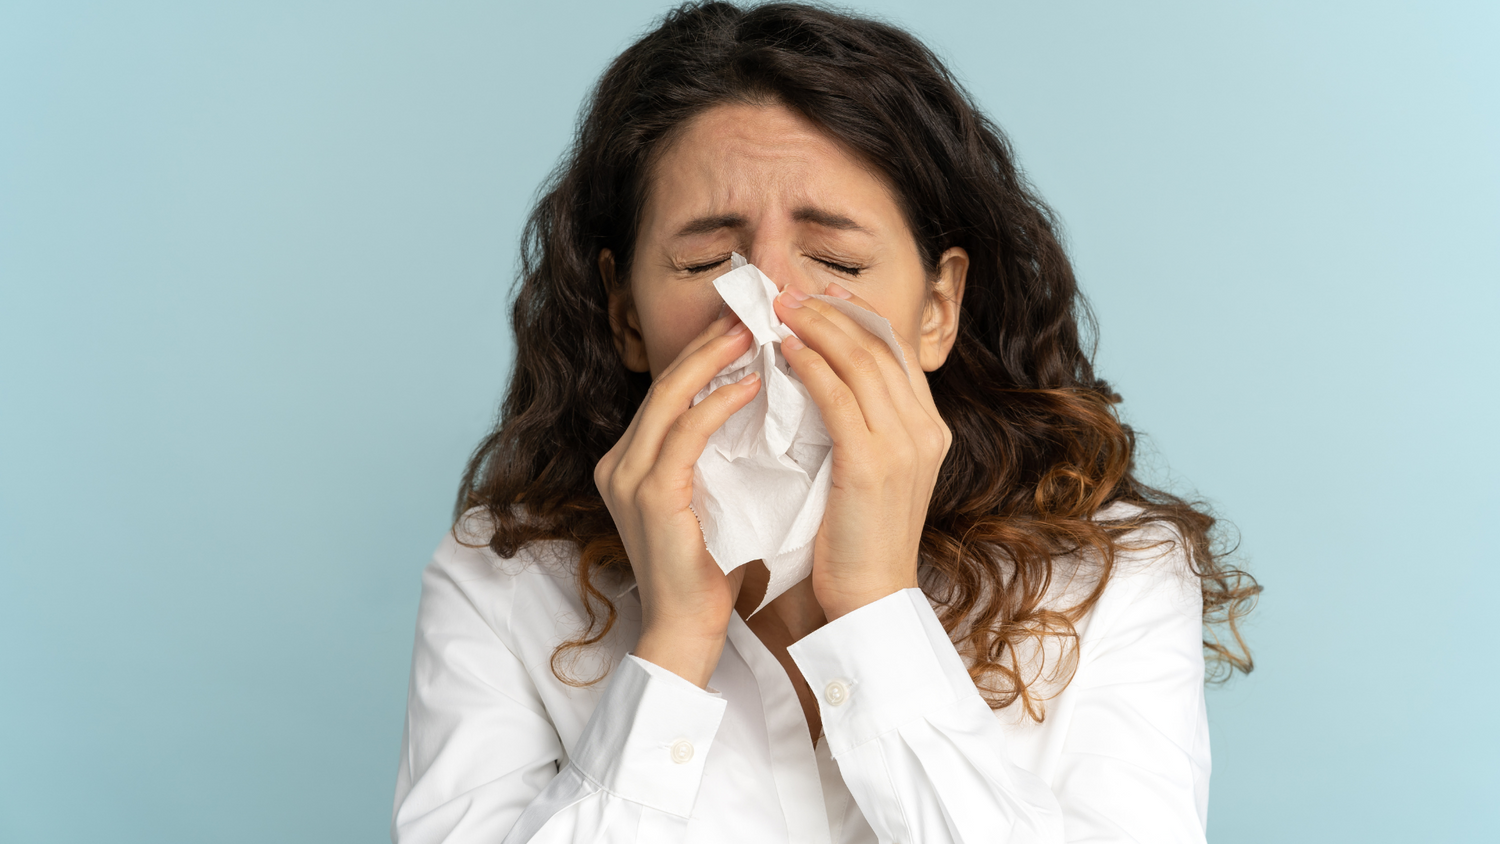 Can Allergy Supplements be a Great Natural Alternative to Benadryl?